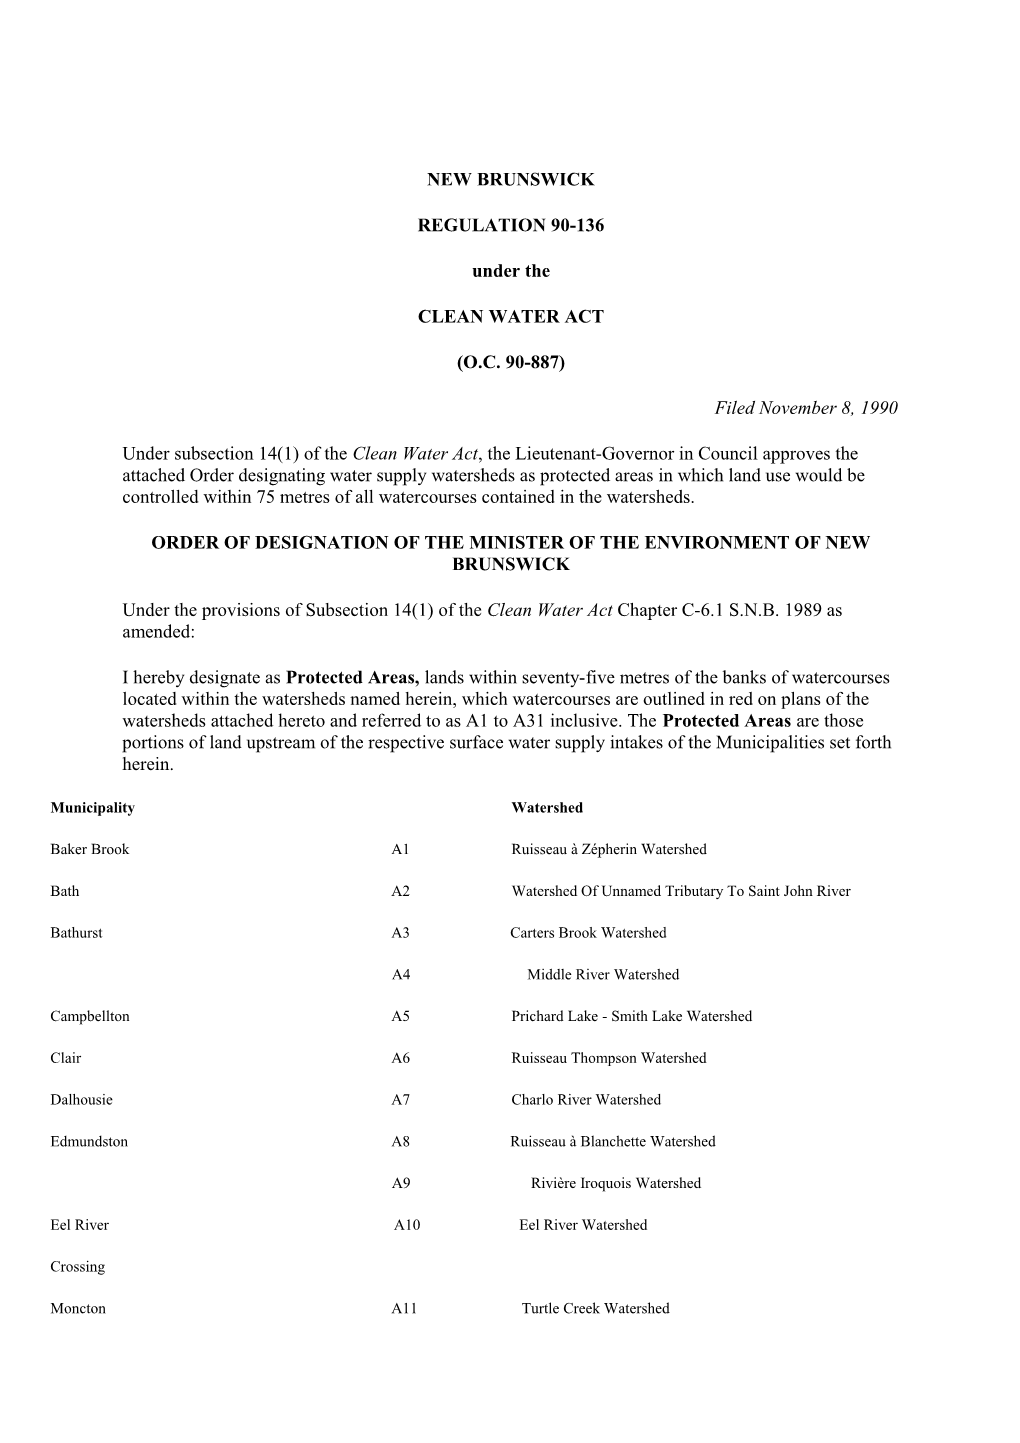 Order of Designation of the Minister of the Environment of New Brunswick